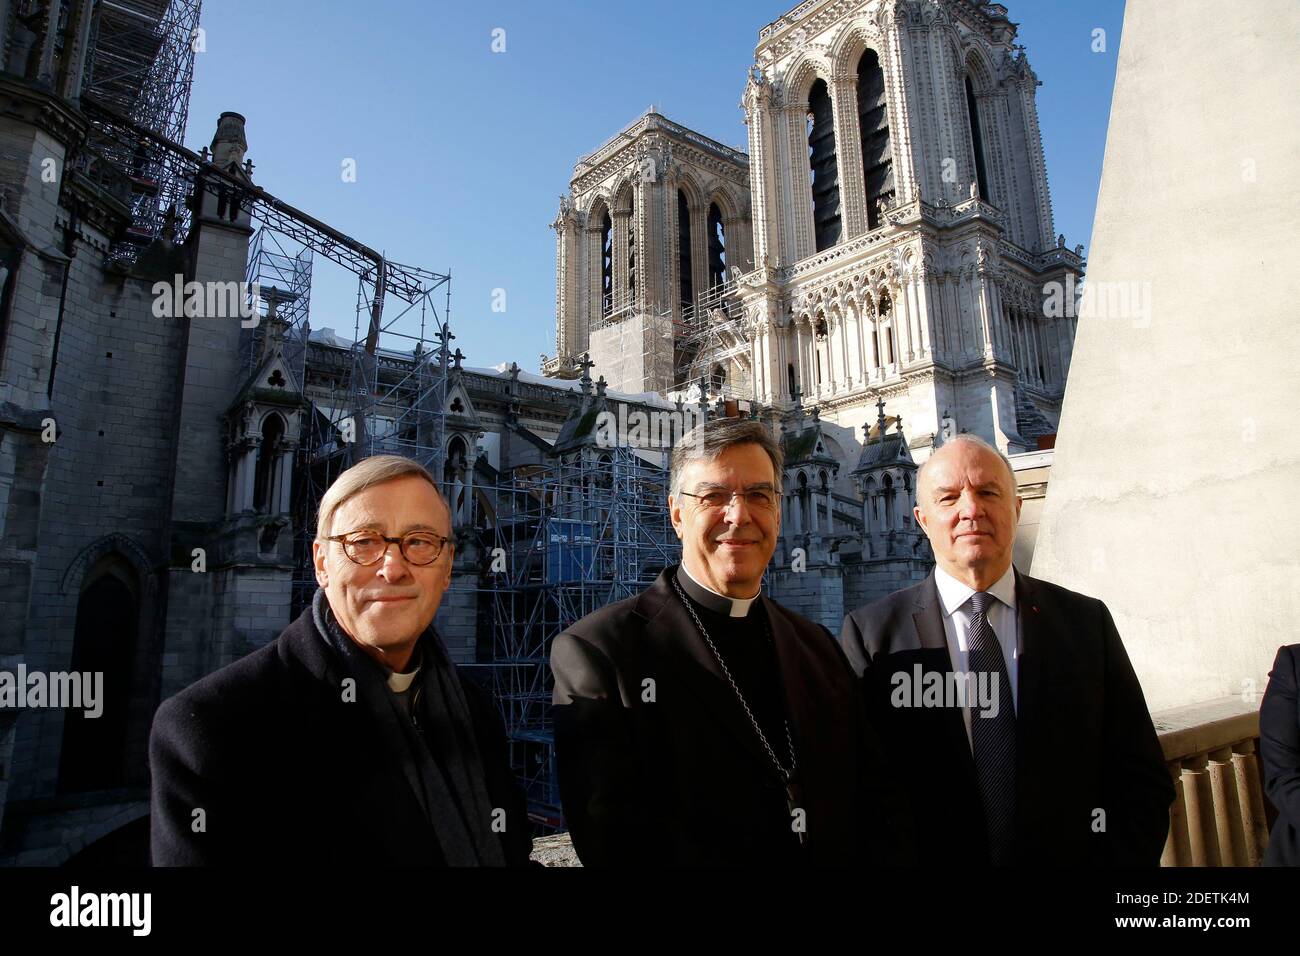 Monseigneur Michel Aupetit, President of the Fondation Notre Dame, General  Jean-Louis Georgelin, in charge of the Restoration of Notre Dame,  Monseigneur Chauvet, rector of Notre Dame at the signing of the Restoration